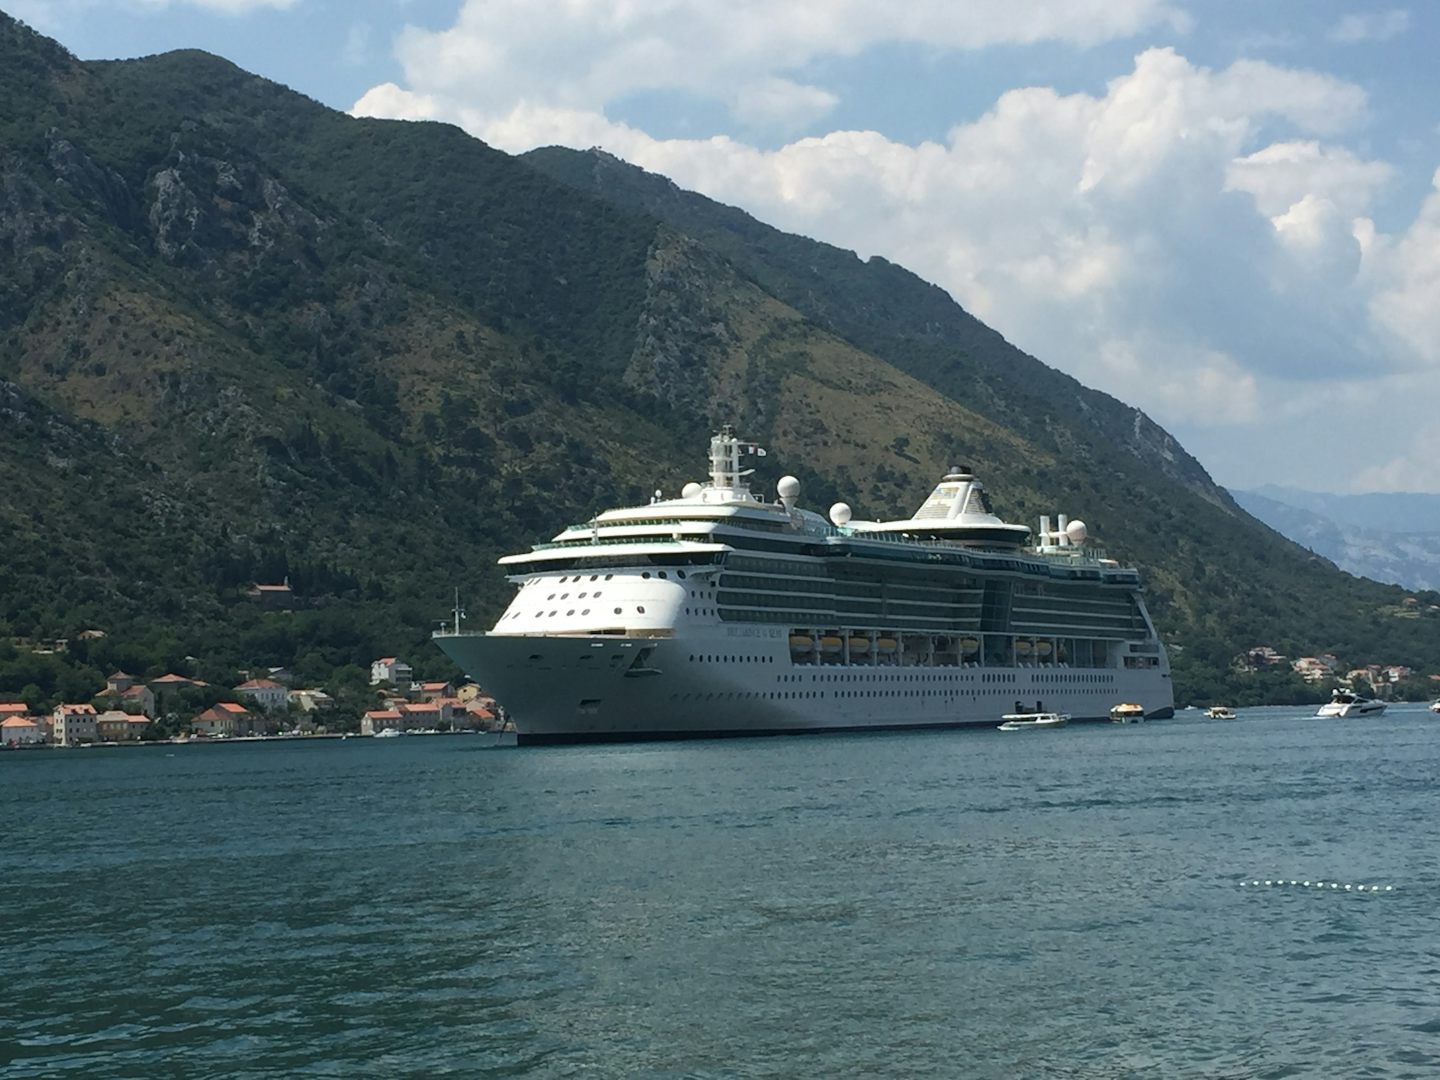 Brilliance of the Seas at anchor in Kotor, Montenegro